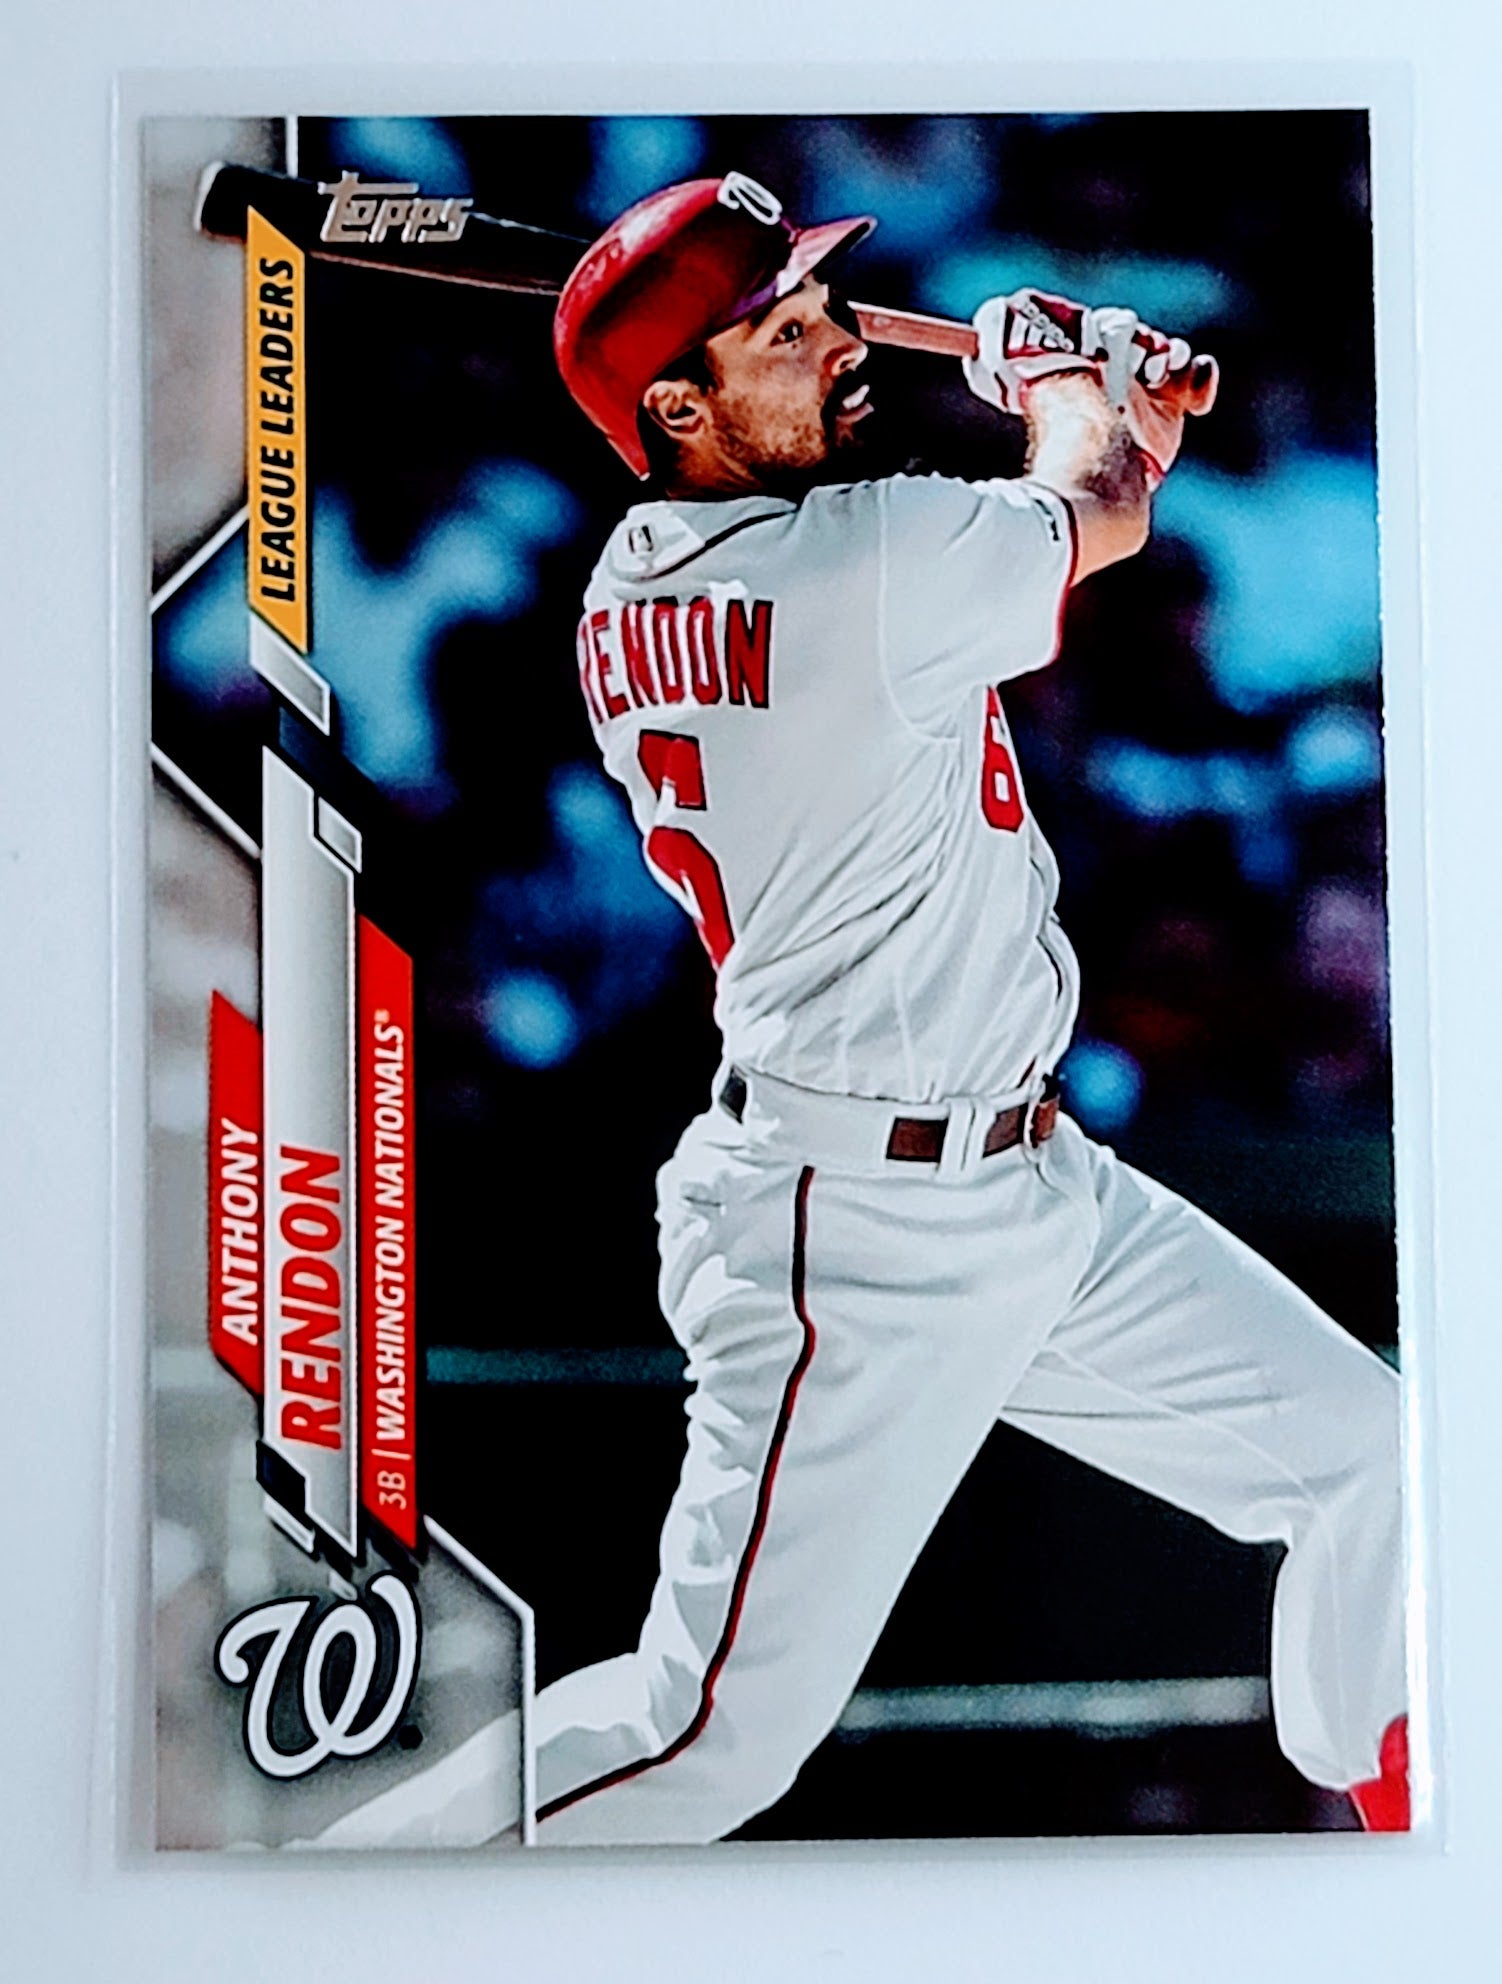 2020 Topps Anthony Rendon   LL Baseball Card  TH13C simple Xclusive Collectibles   